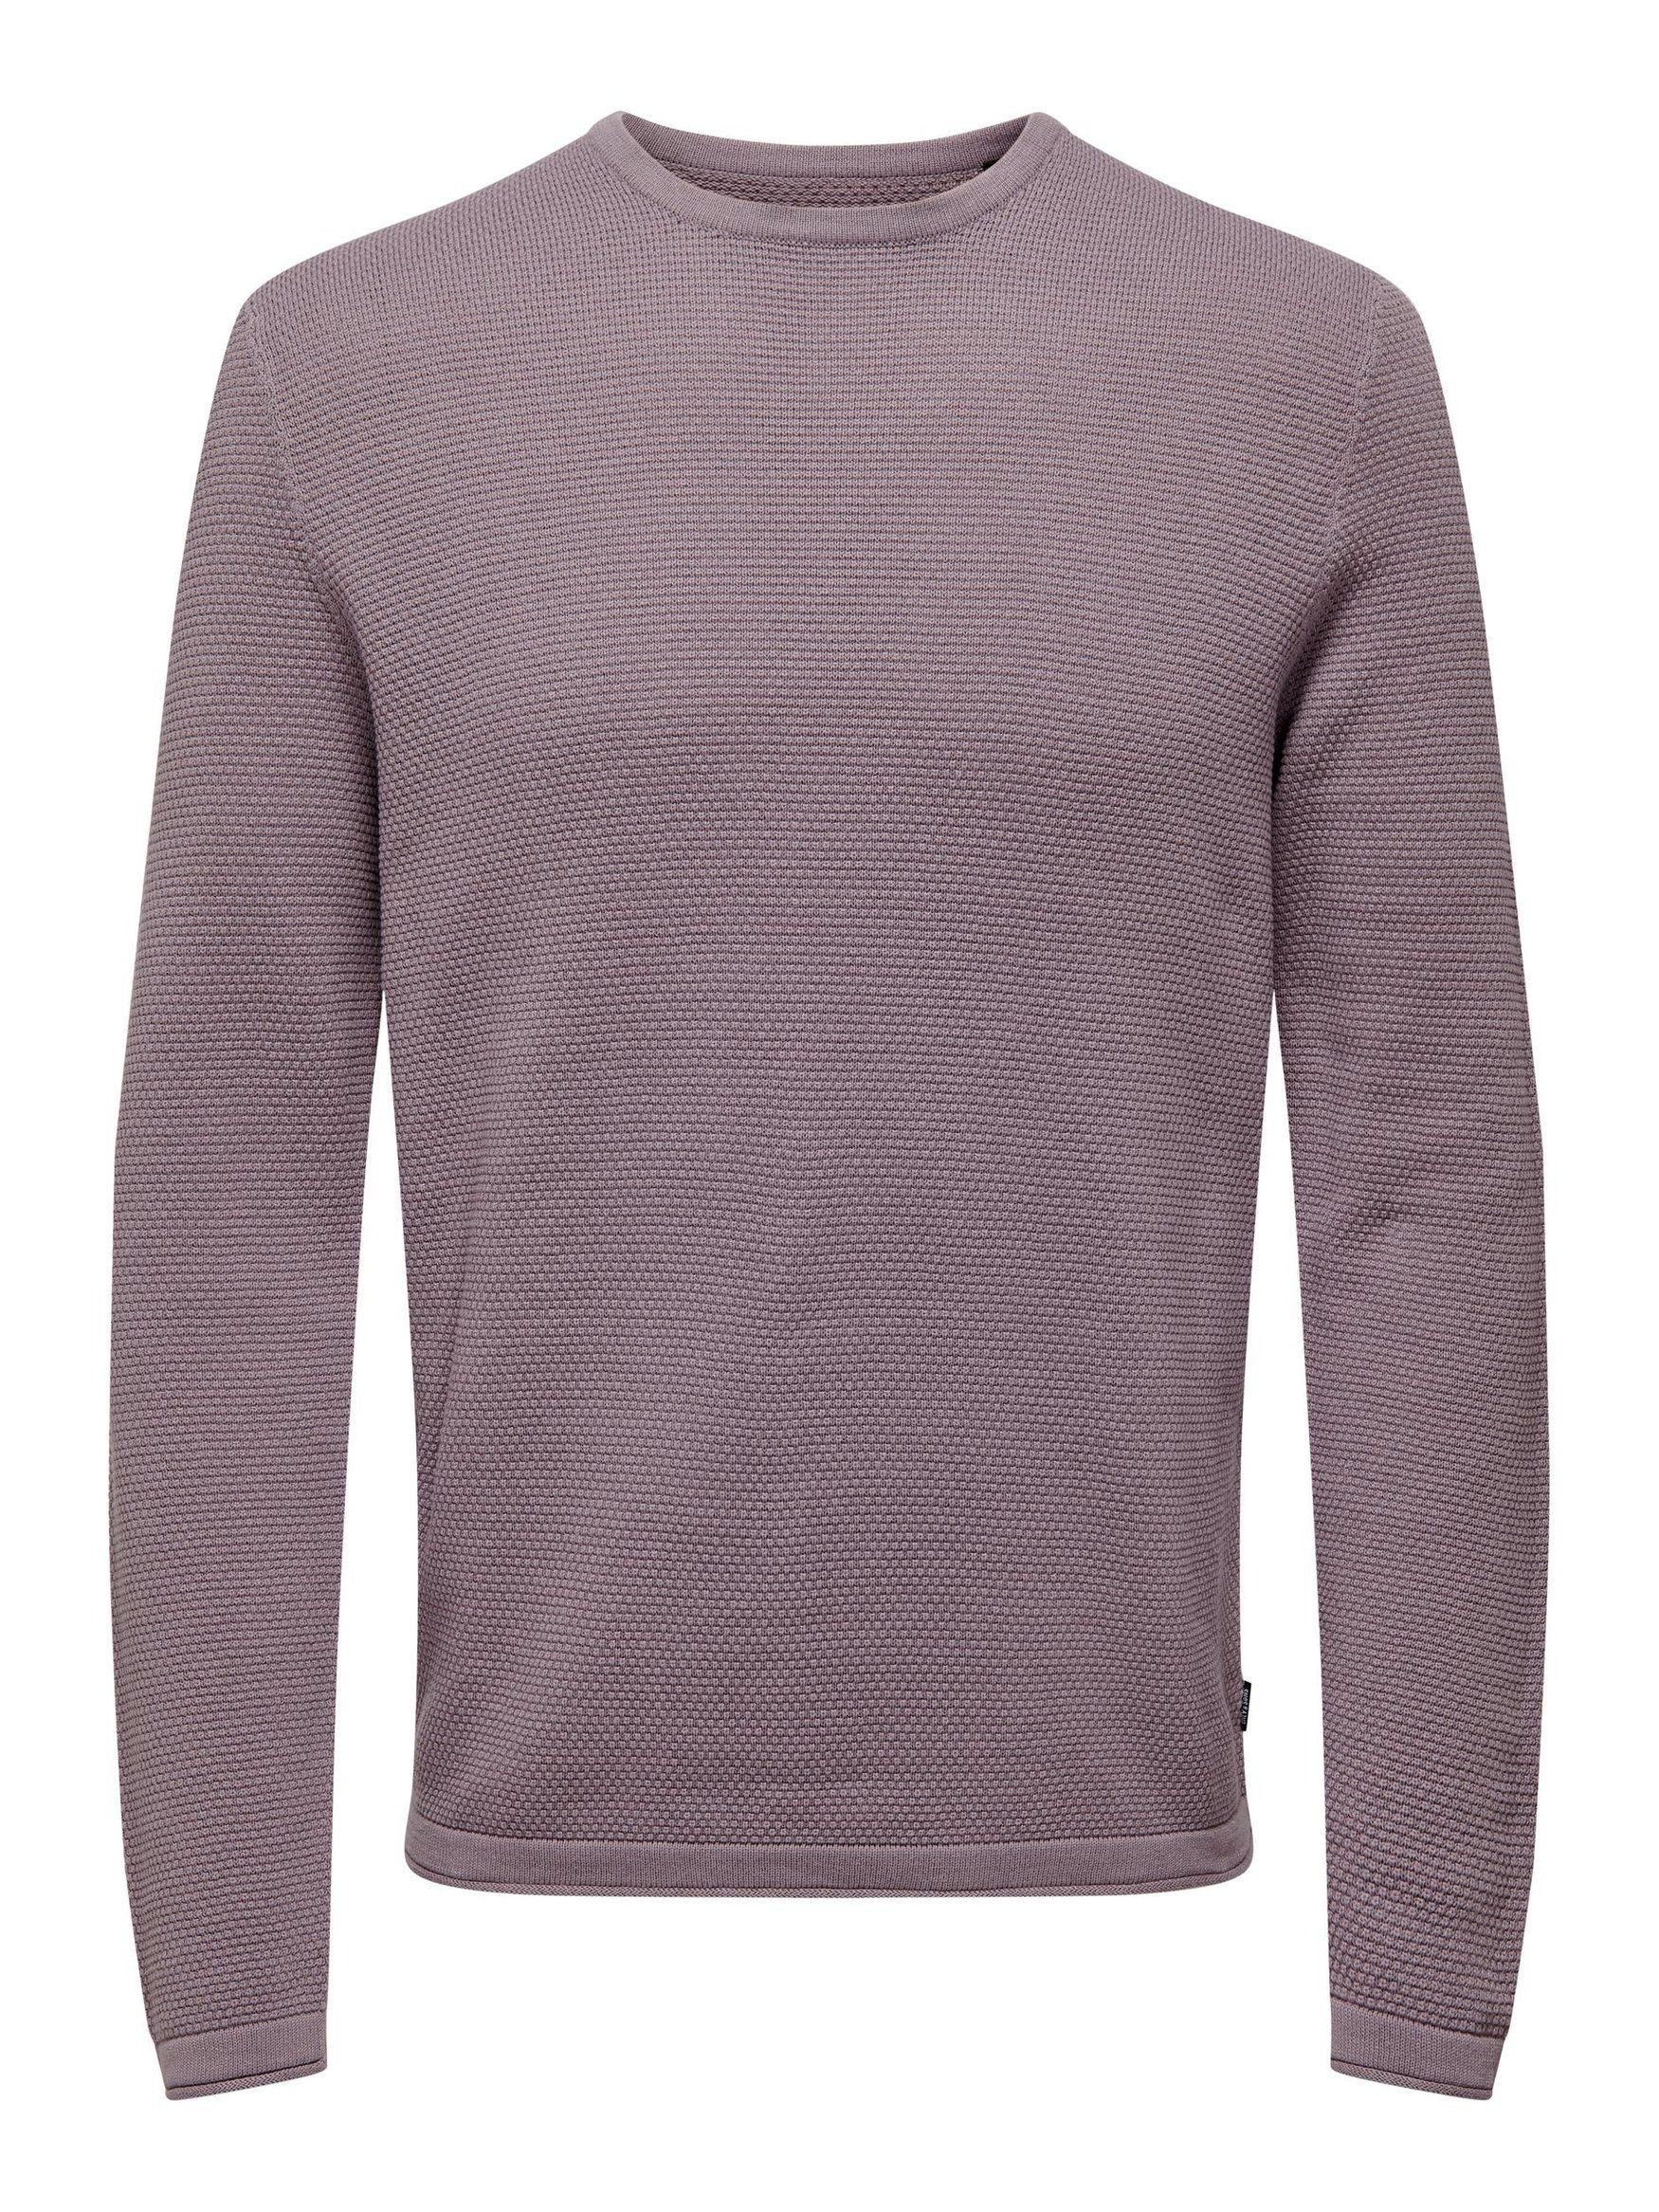 ONLY & SONS Strickpullover Dünner Langarm Strickpullover Rundhals Basic Sweater ONSPANTER 4421 in Lila